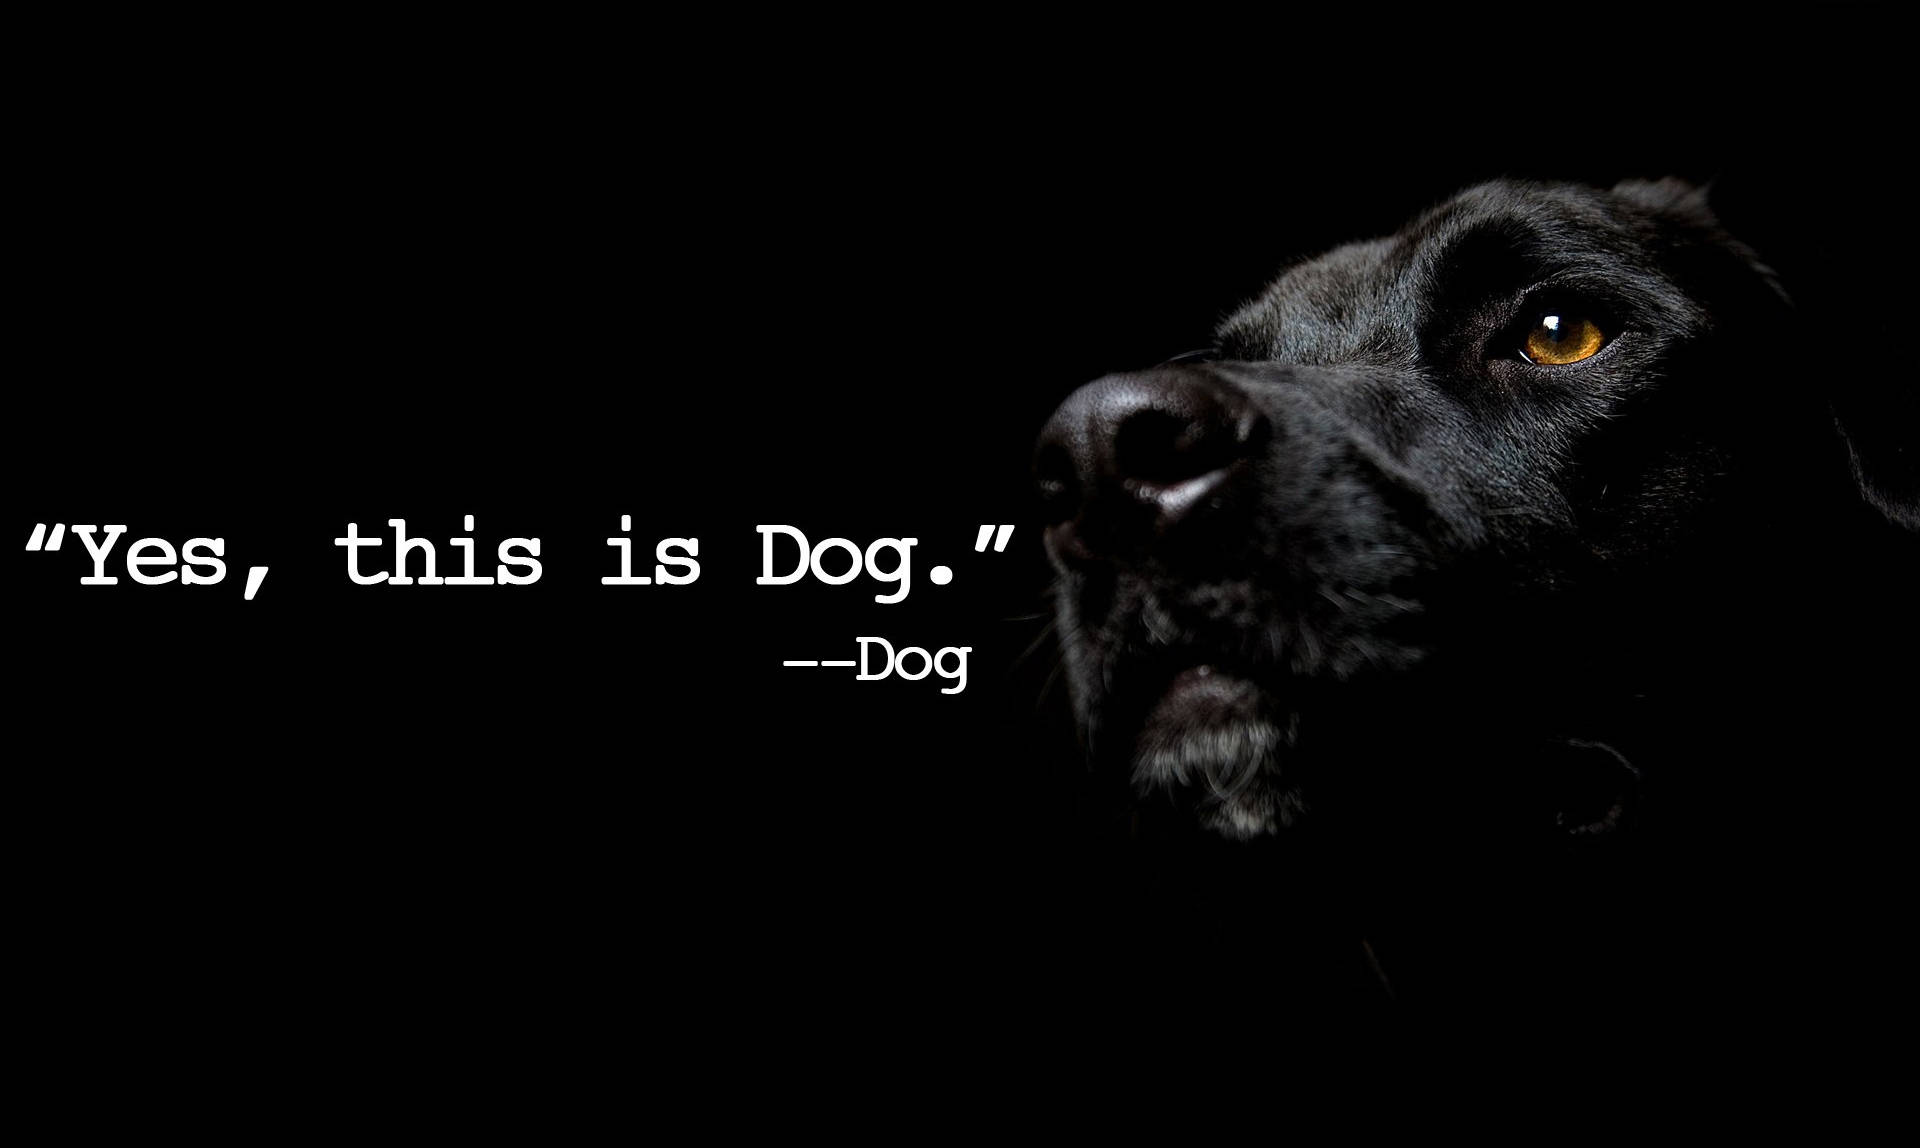 Yes, This Is Dog Meme Wallpaper